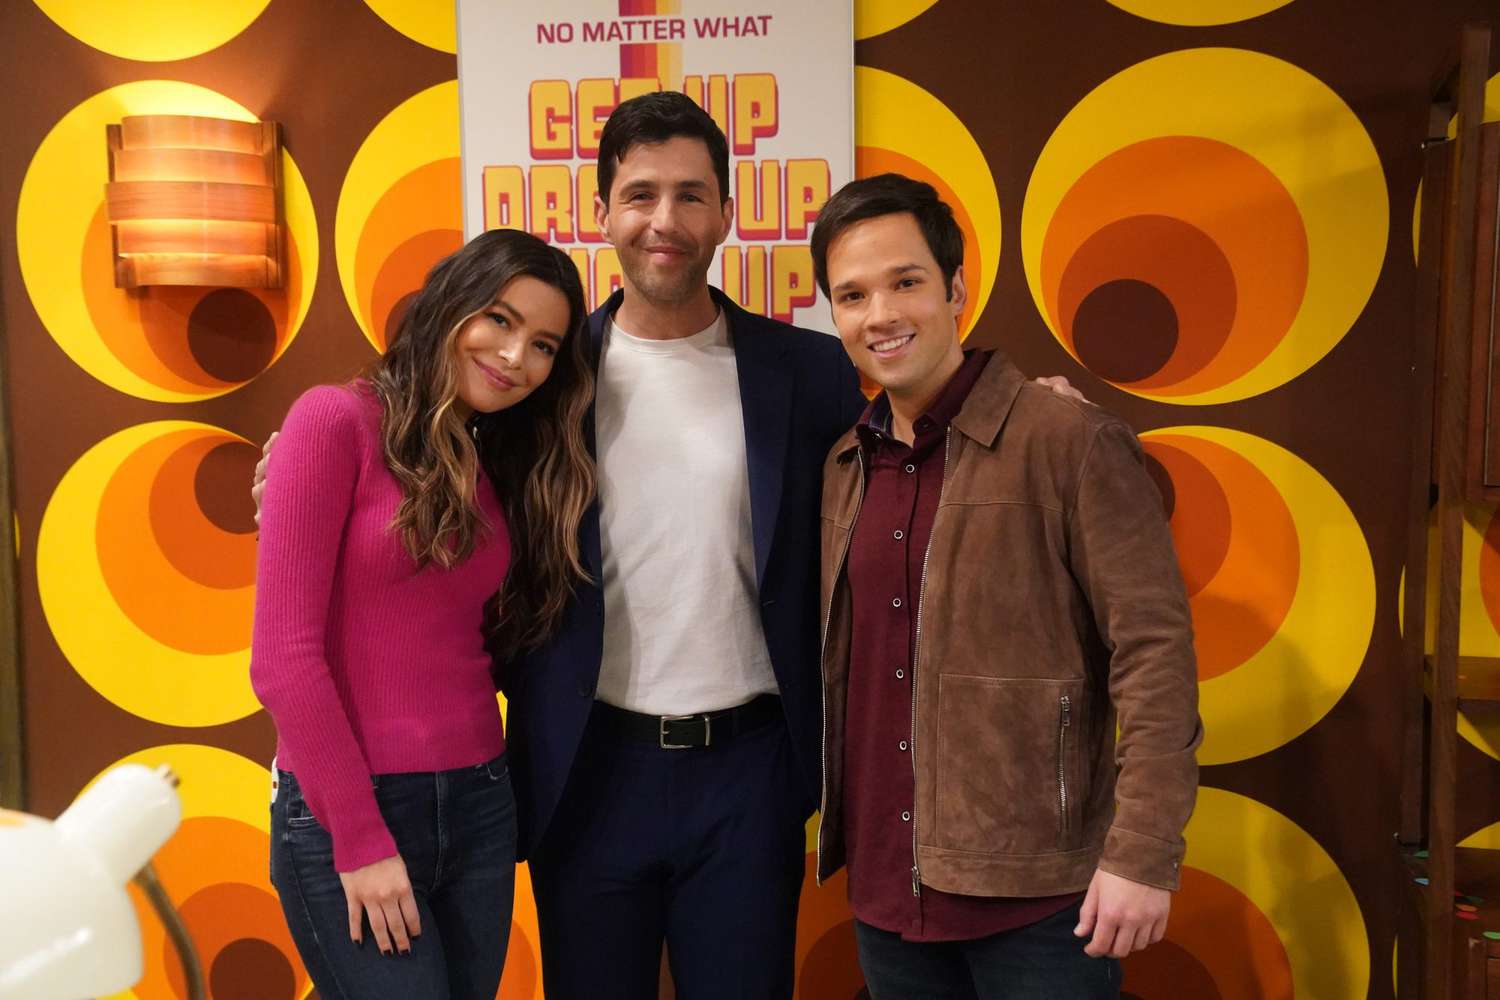 Josh Peck to Guest Star on iCarly Reboot | PEOPLE.com